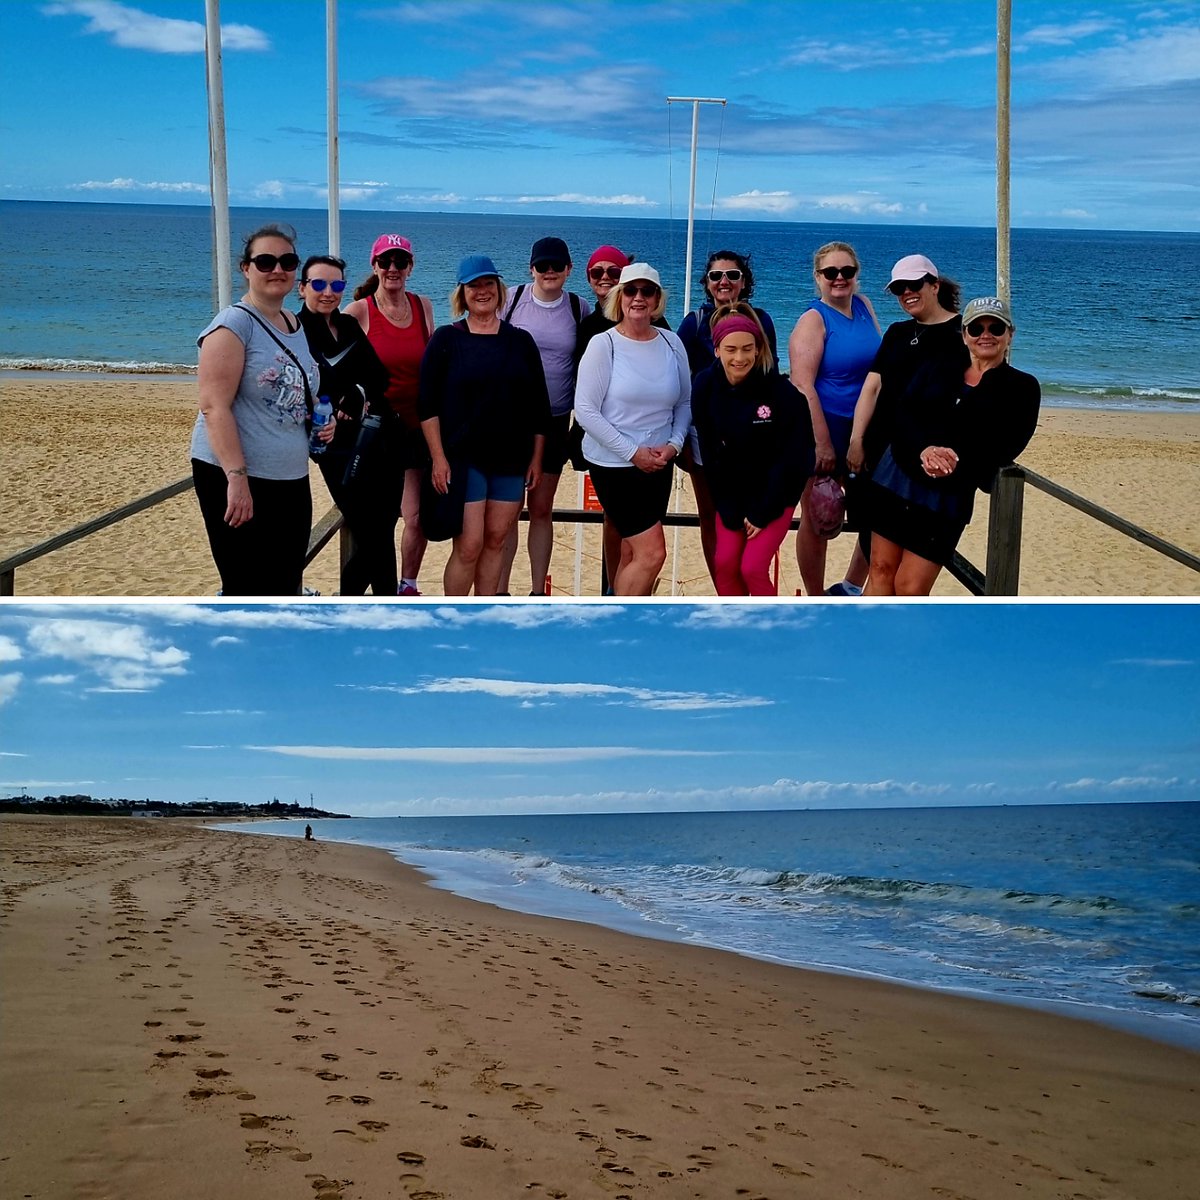 10k walk along the nature reserve and beach ⛱️ perfect morning 🌞 

#fithessholiday #selfcateringcamp #fitnessjourney #wakeupworkout #portugalbootcamp #fitnessfun #ladiesbootcamp 

zurl.co/DHGa